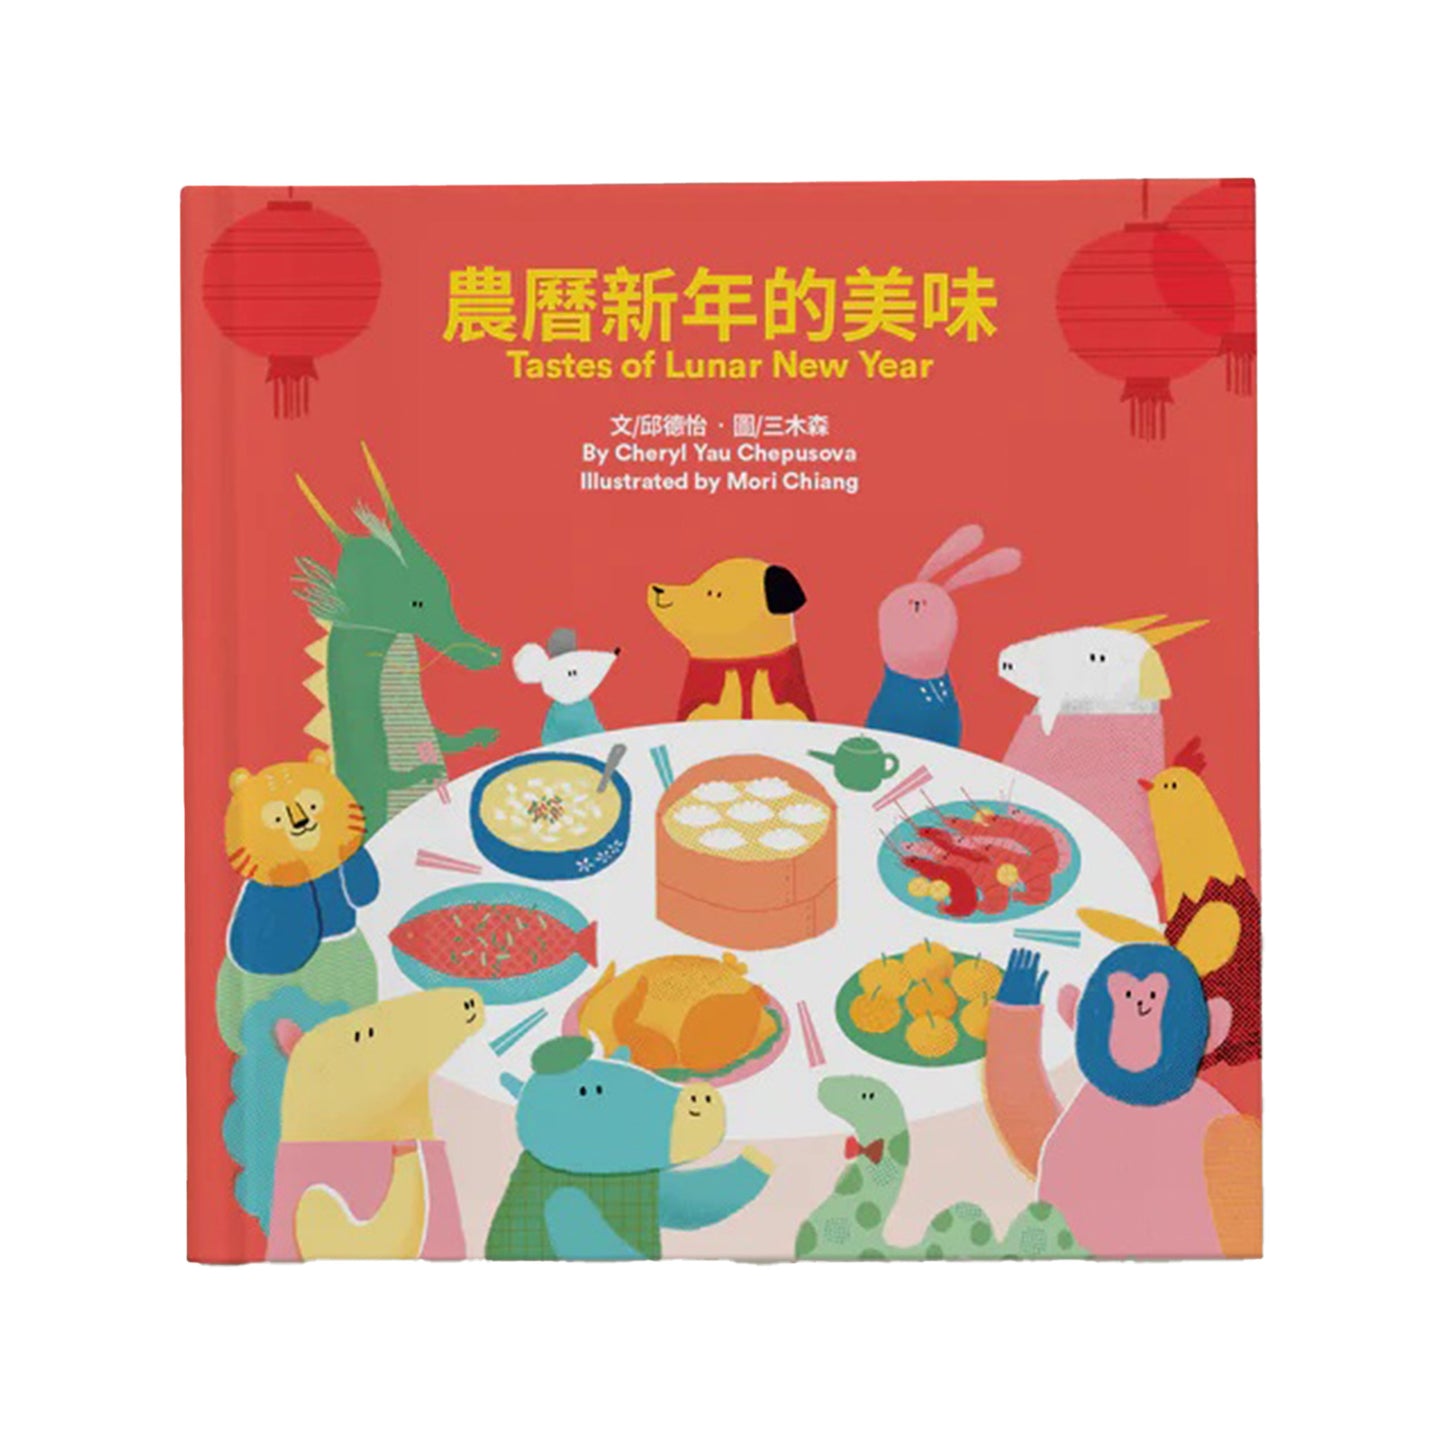 Tastes of Lunar New Year: Bilingual English/Traditional Chinese